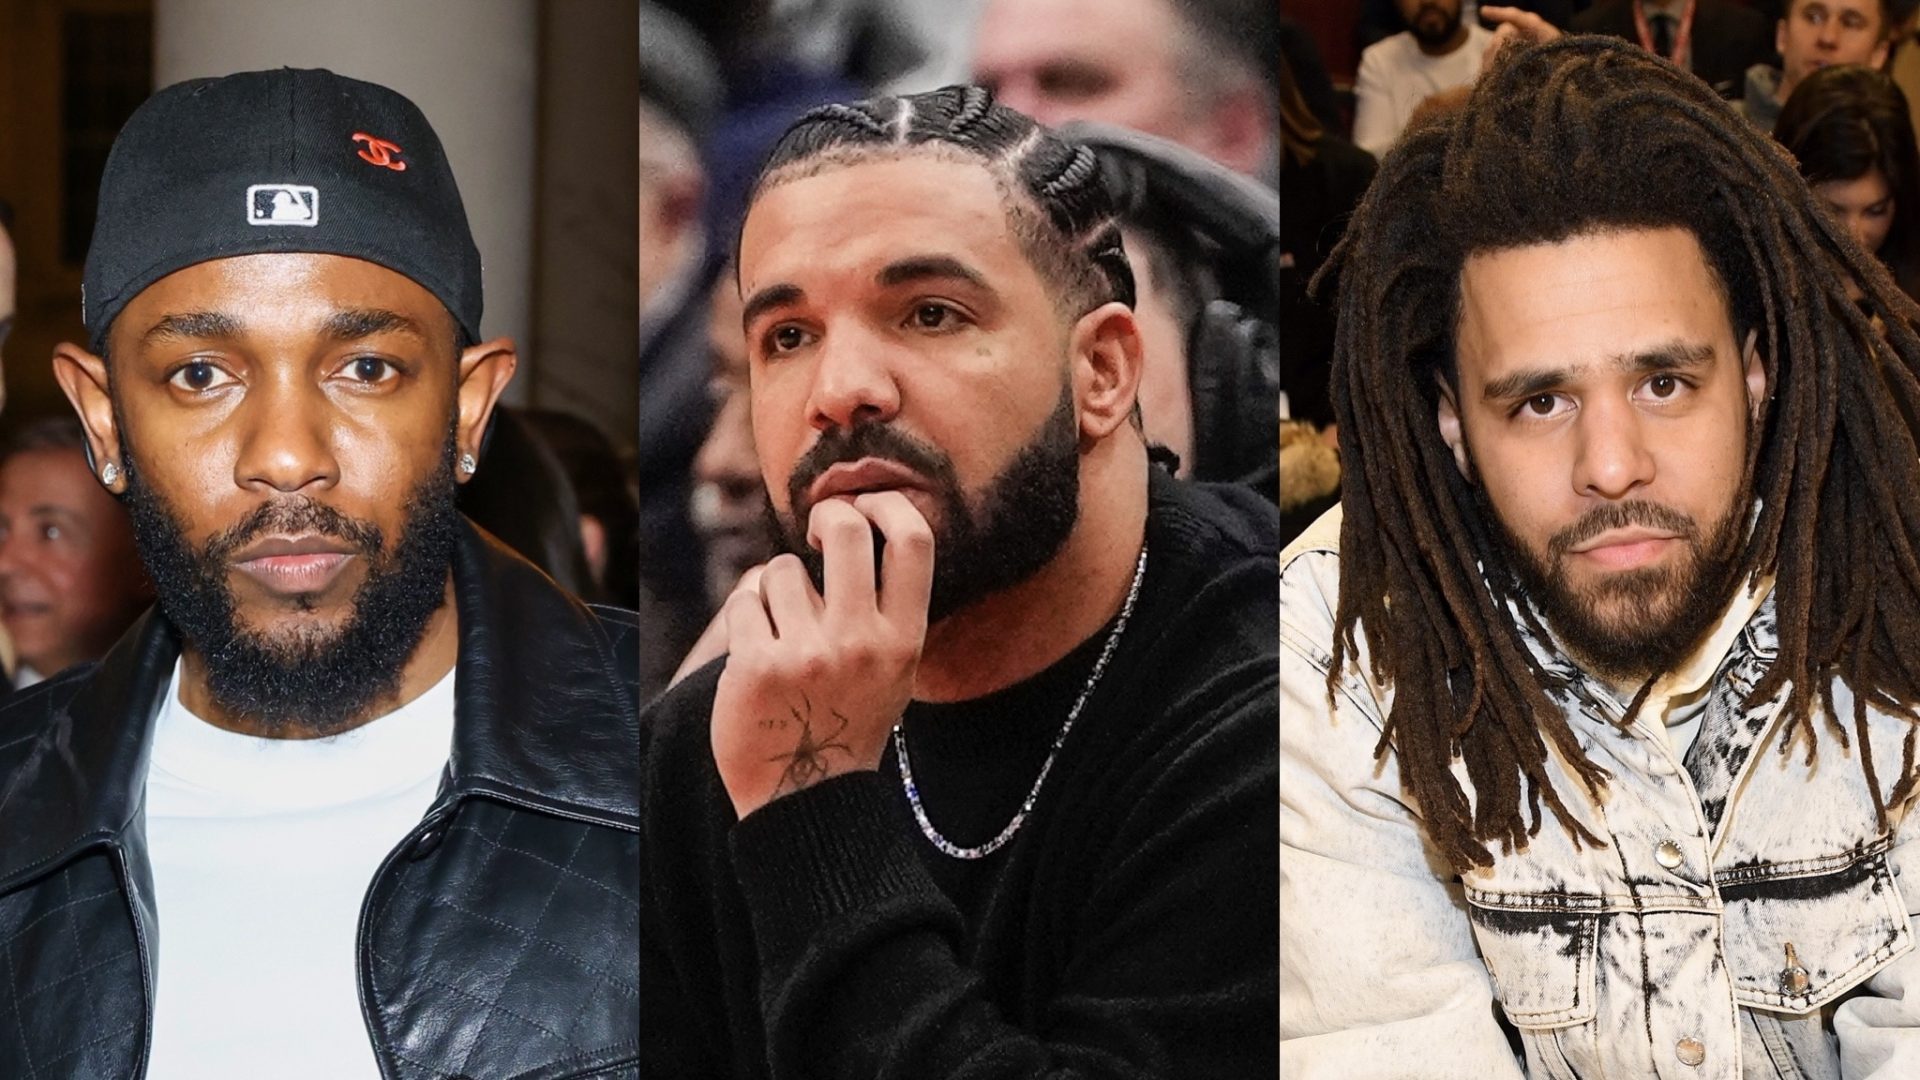 Here We Go! Social Media Speculates If Kendrick Lamar Is Taking Shots At Drake & J. Cole (LISTEN)